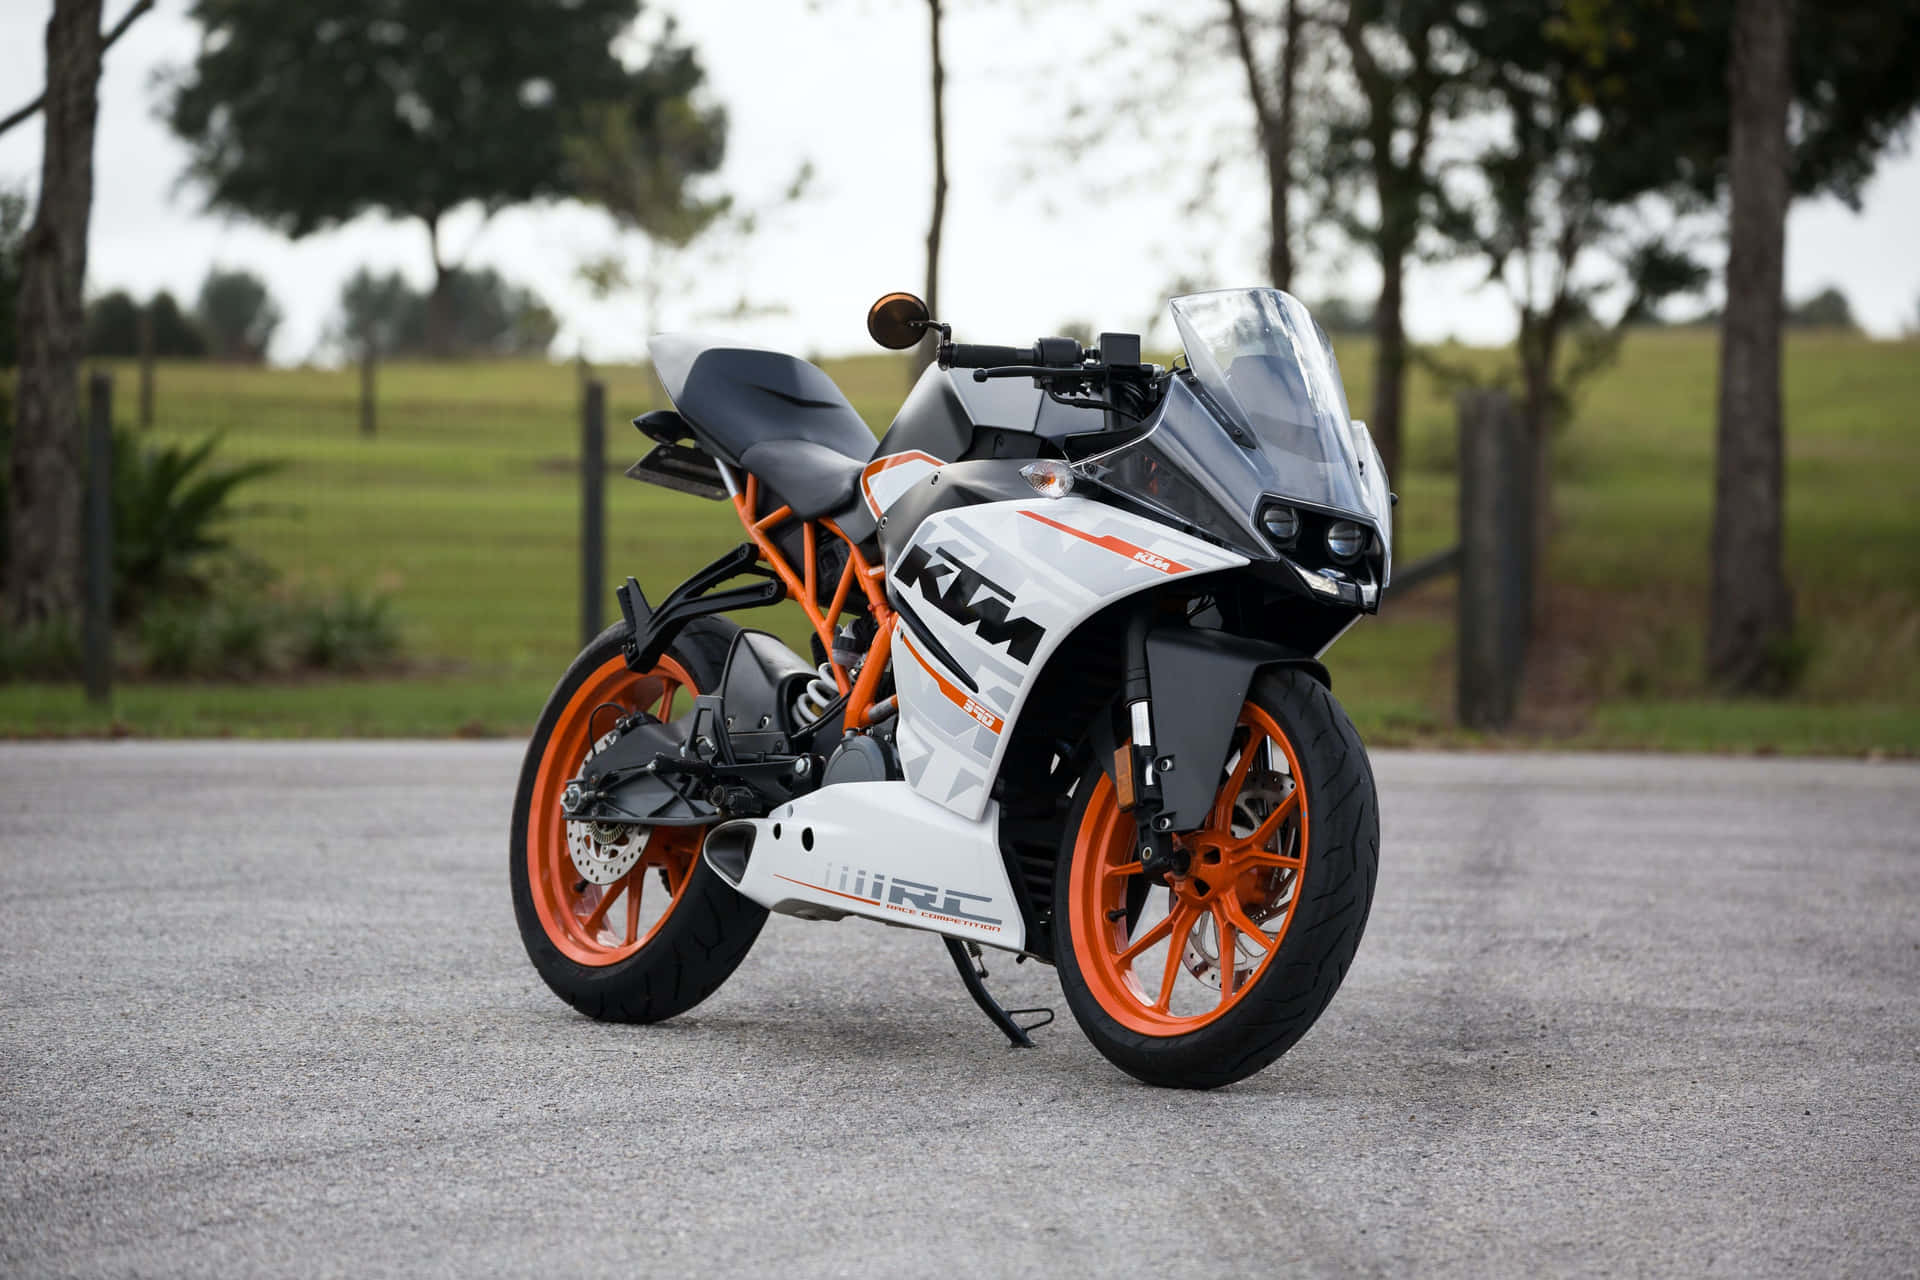 Experience Power and Performance With a KTM Bike